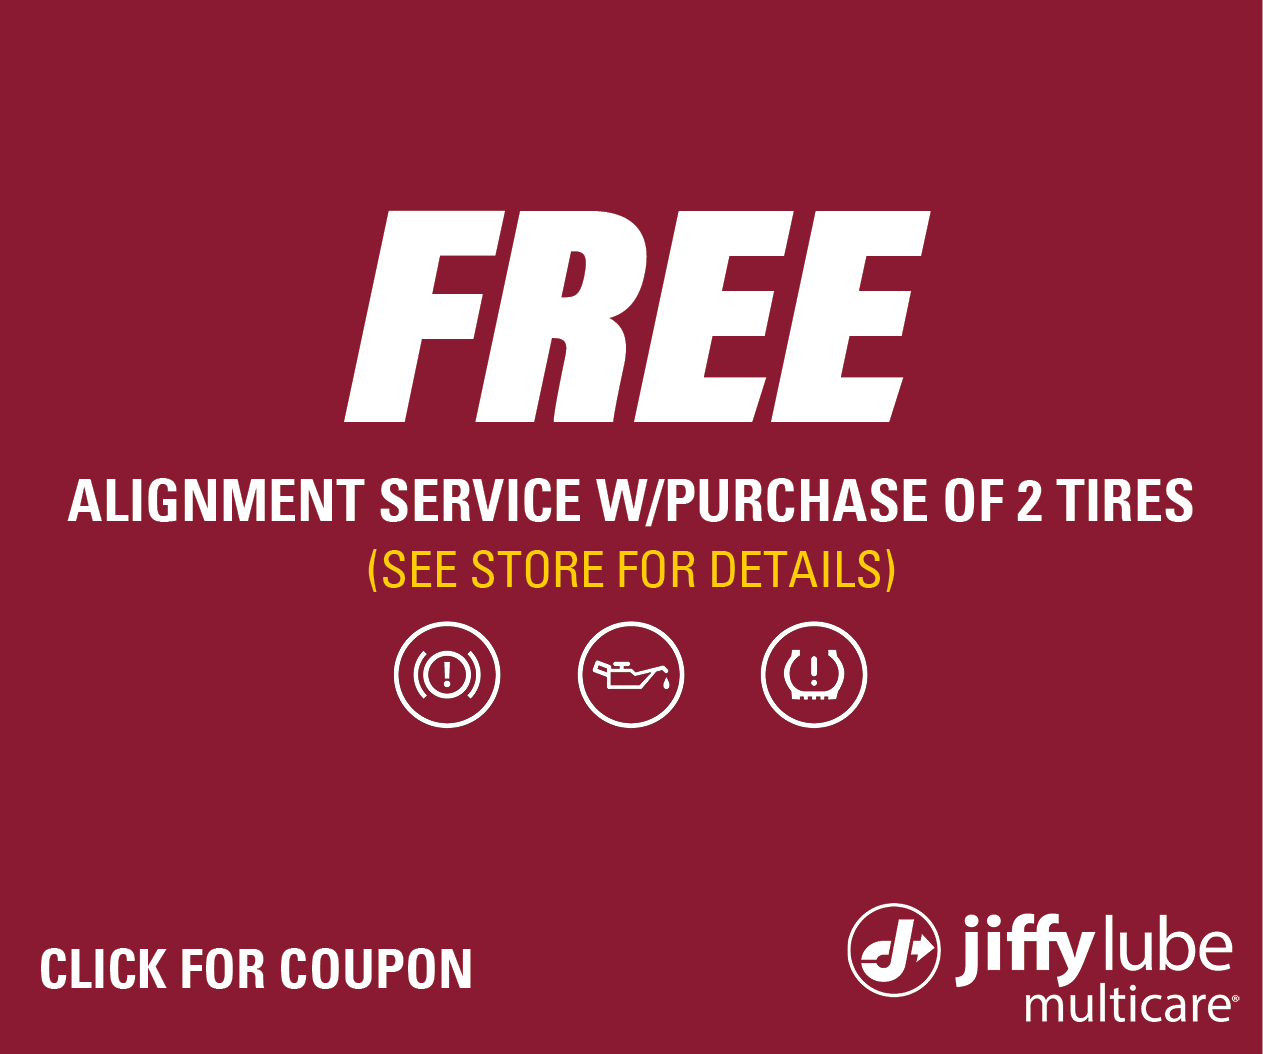 FREE Alignment Service With Purchase Of 2 Tires Website Image (Bronco Lube)